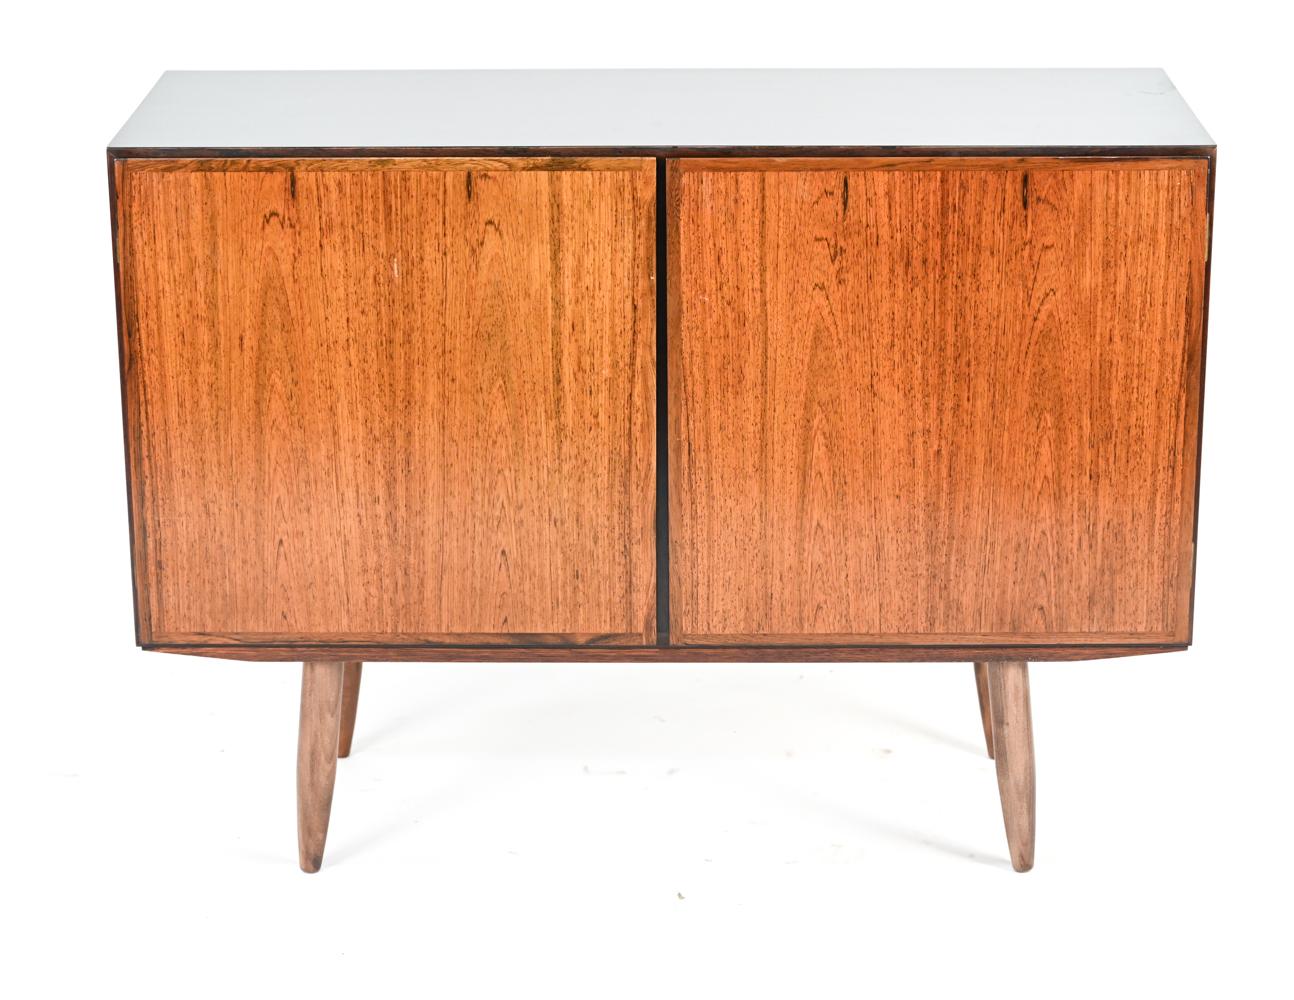 A handsome Danish mid-century rosewood cabinet with attractive shiny black laminate top by Oman Jun.